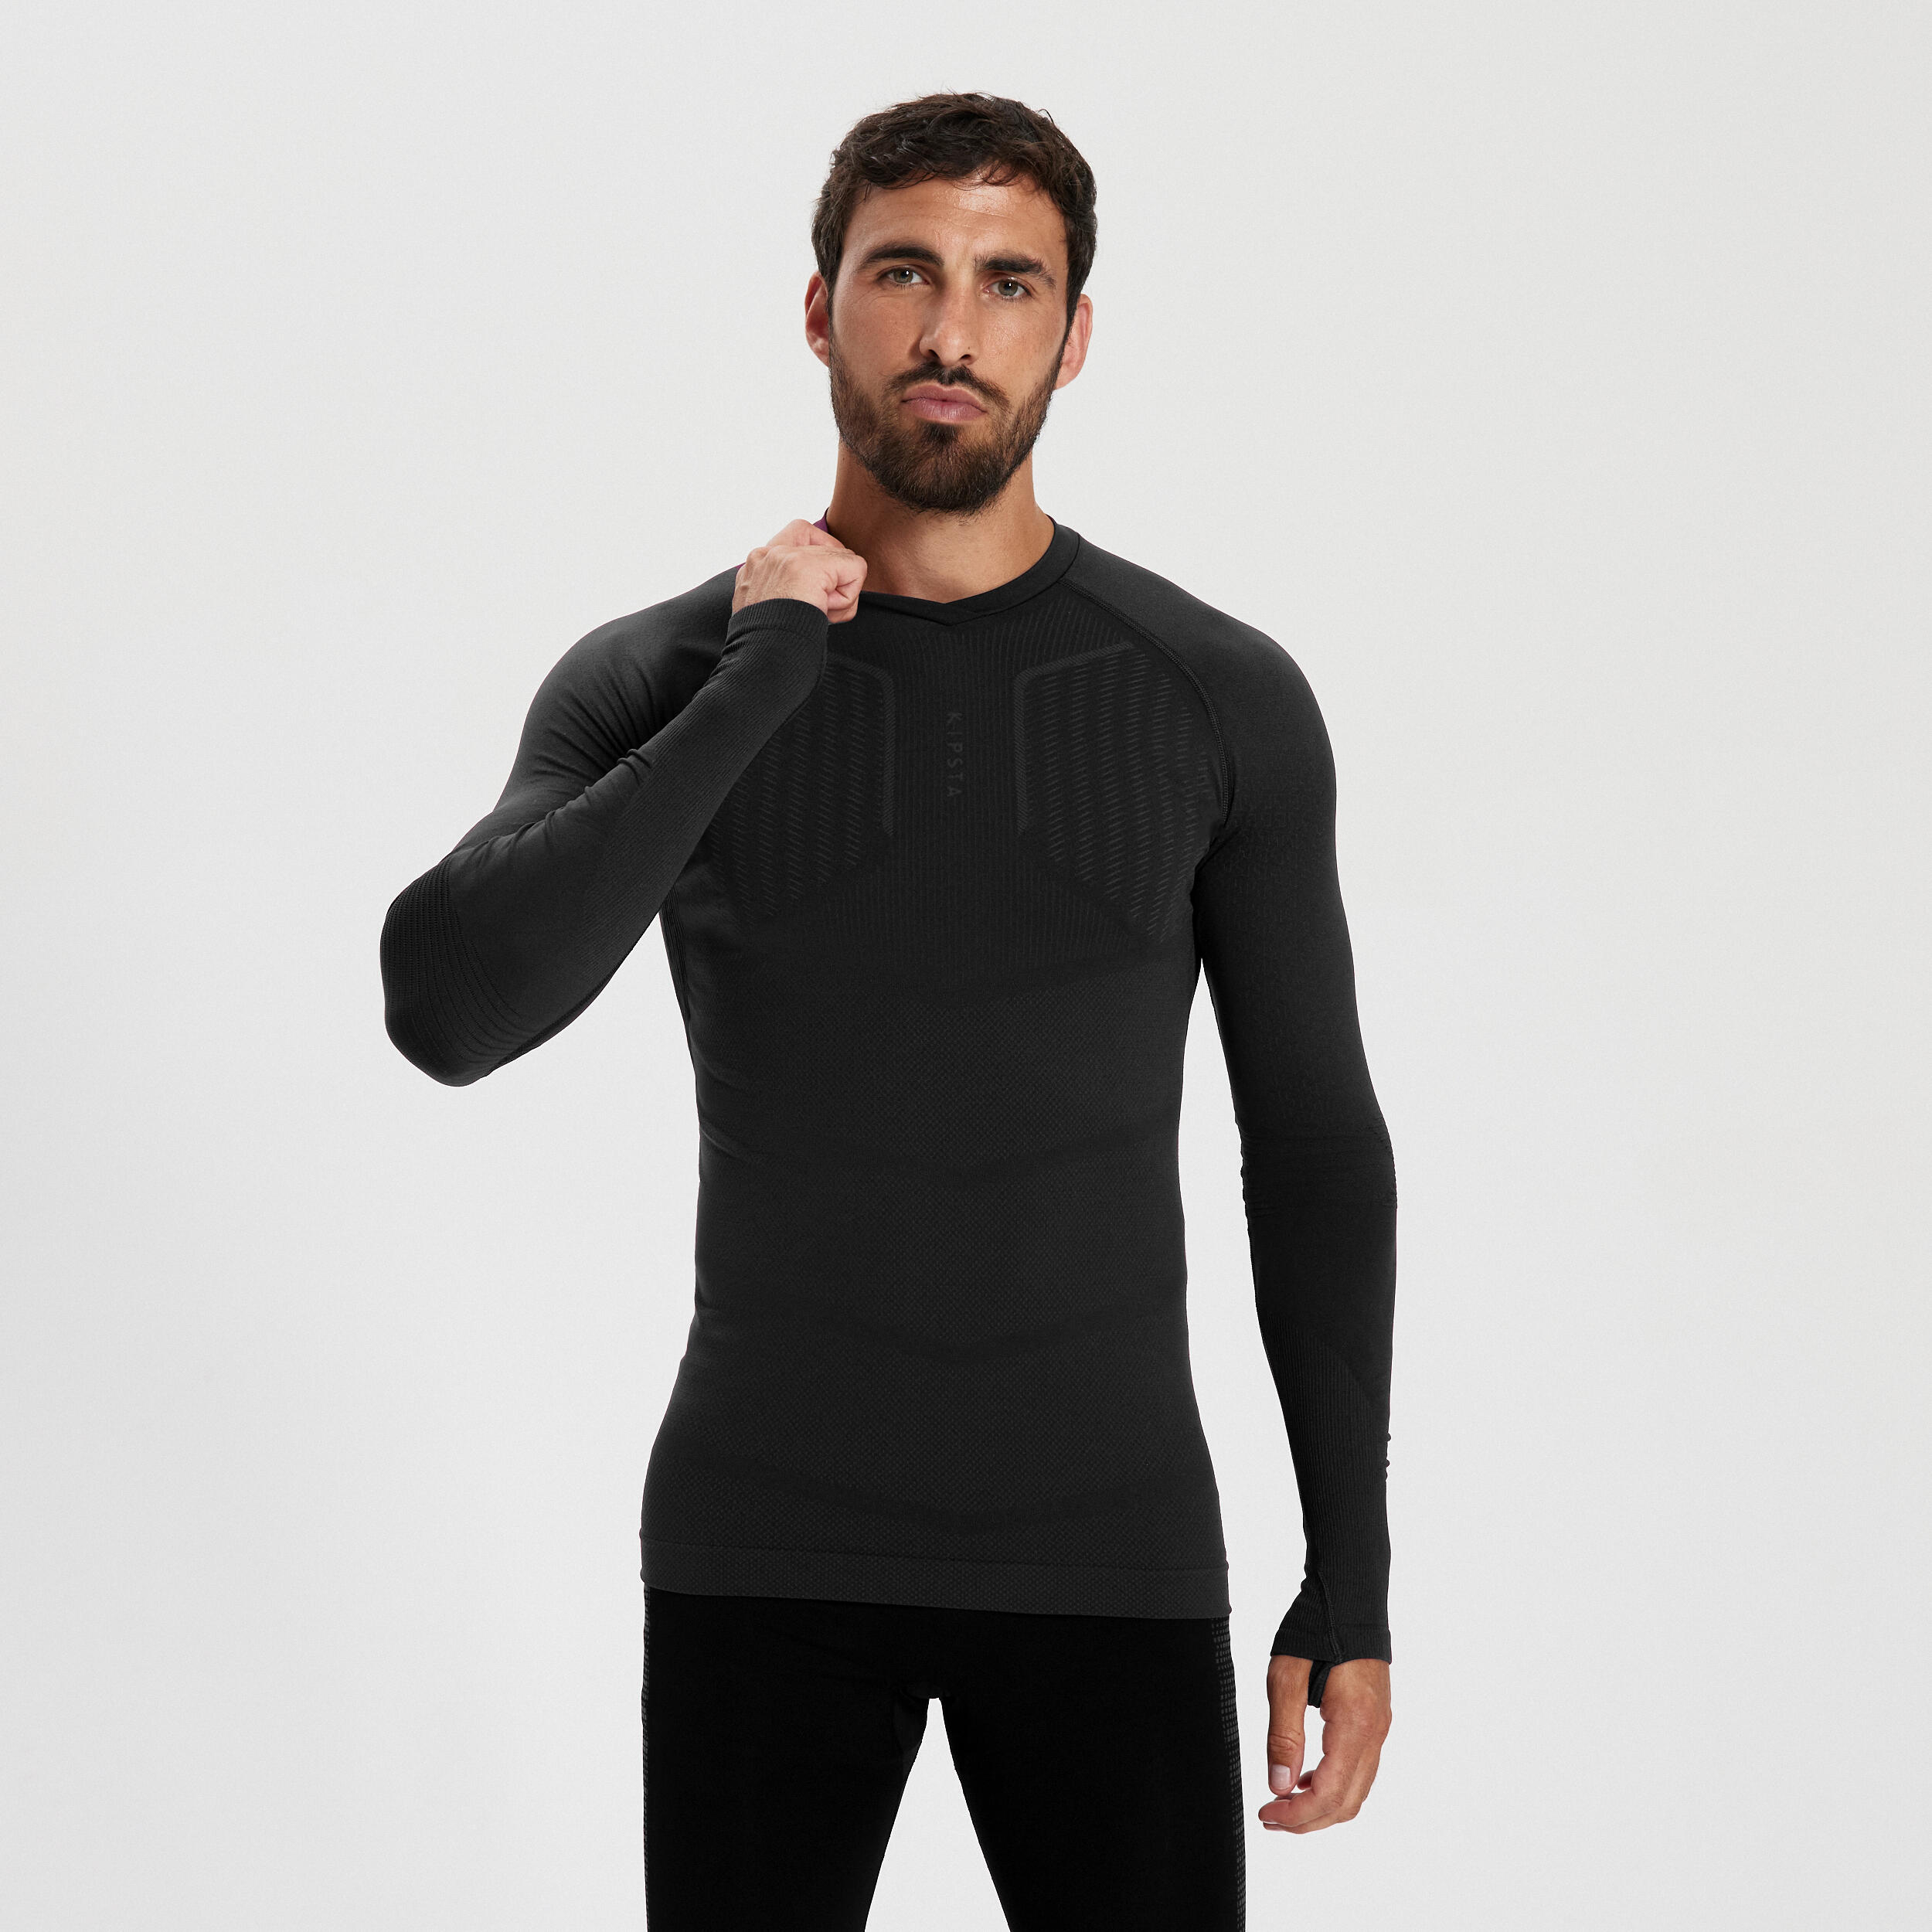 Adult Football Long-Sleeve Compression Base Layer Tight Keepdry 500 Black